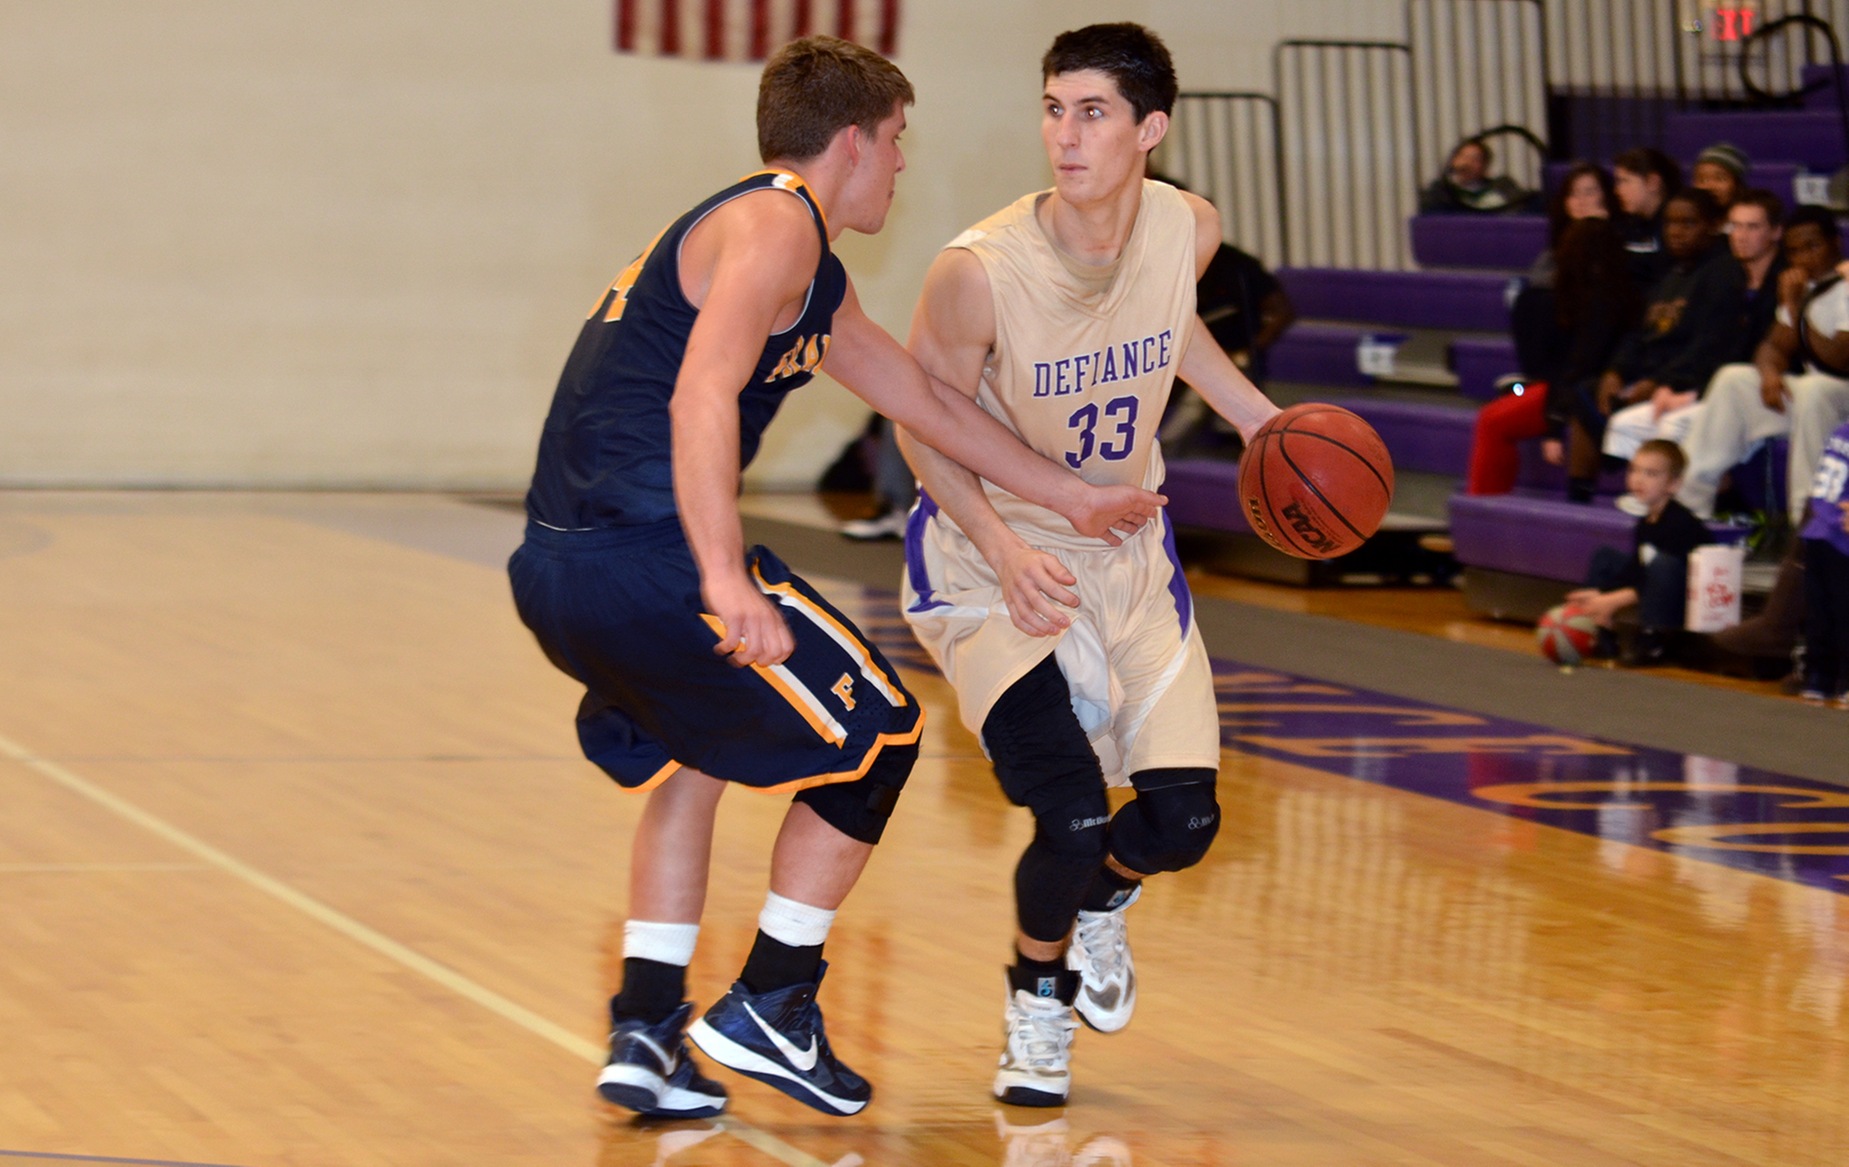 HCAC Honors Wolfrum for Record-Setting Week